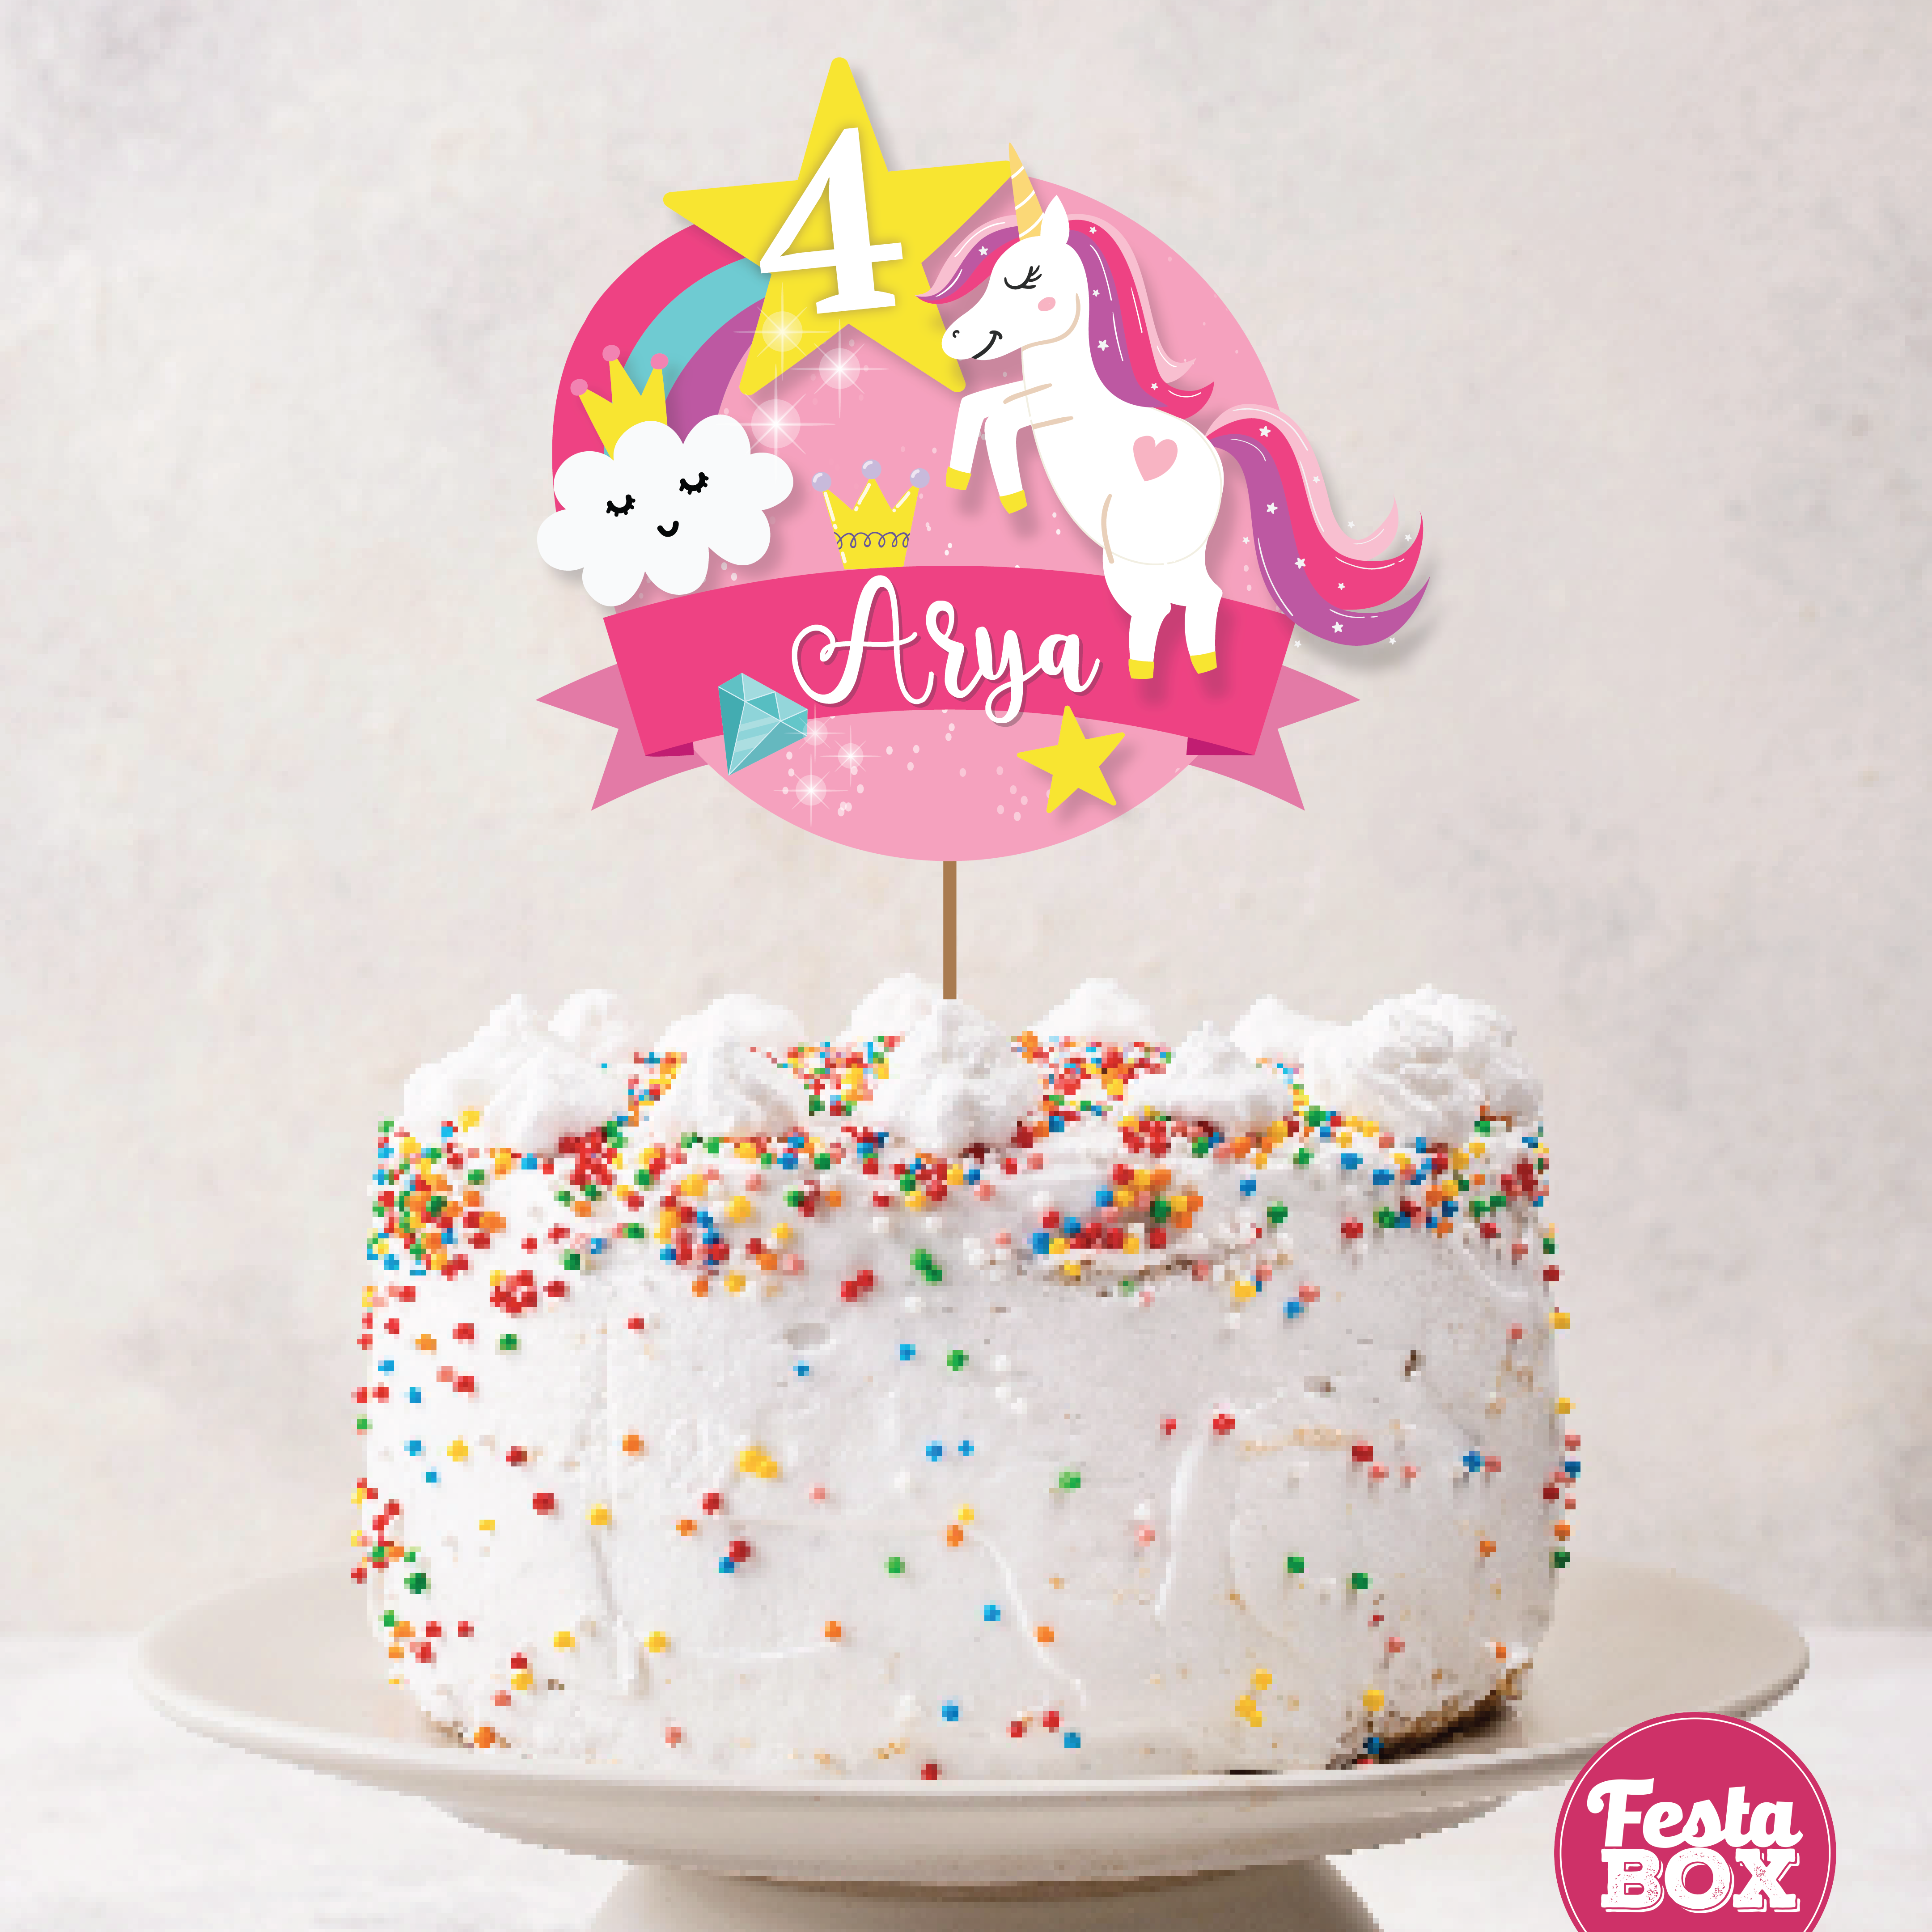 Free Printable Unicorn Cake Toppers. - Oh My Fiesta! in english